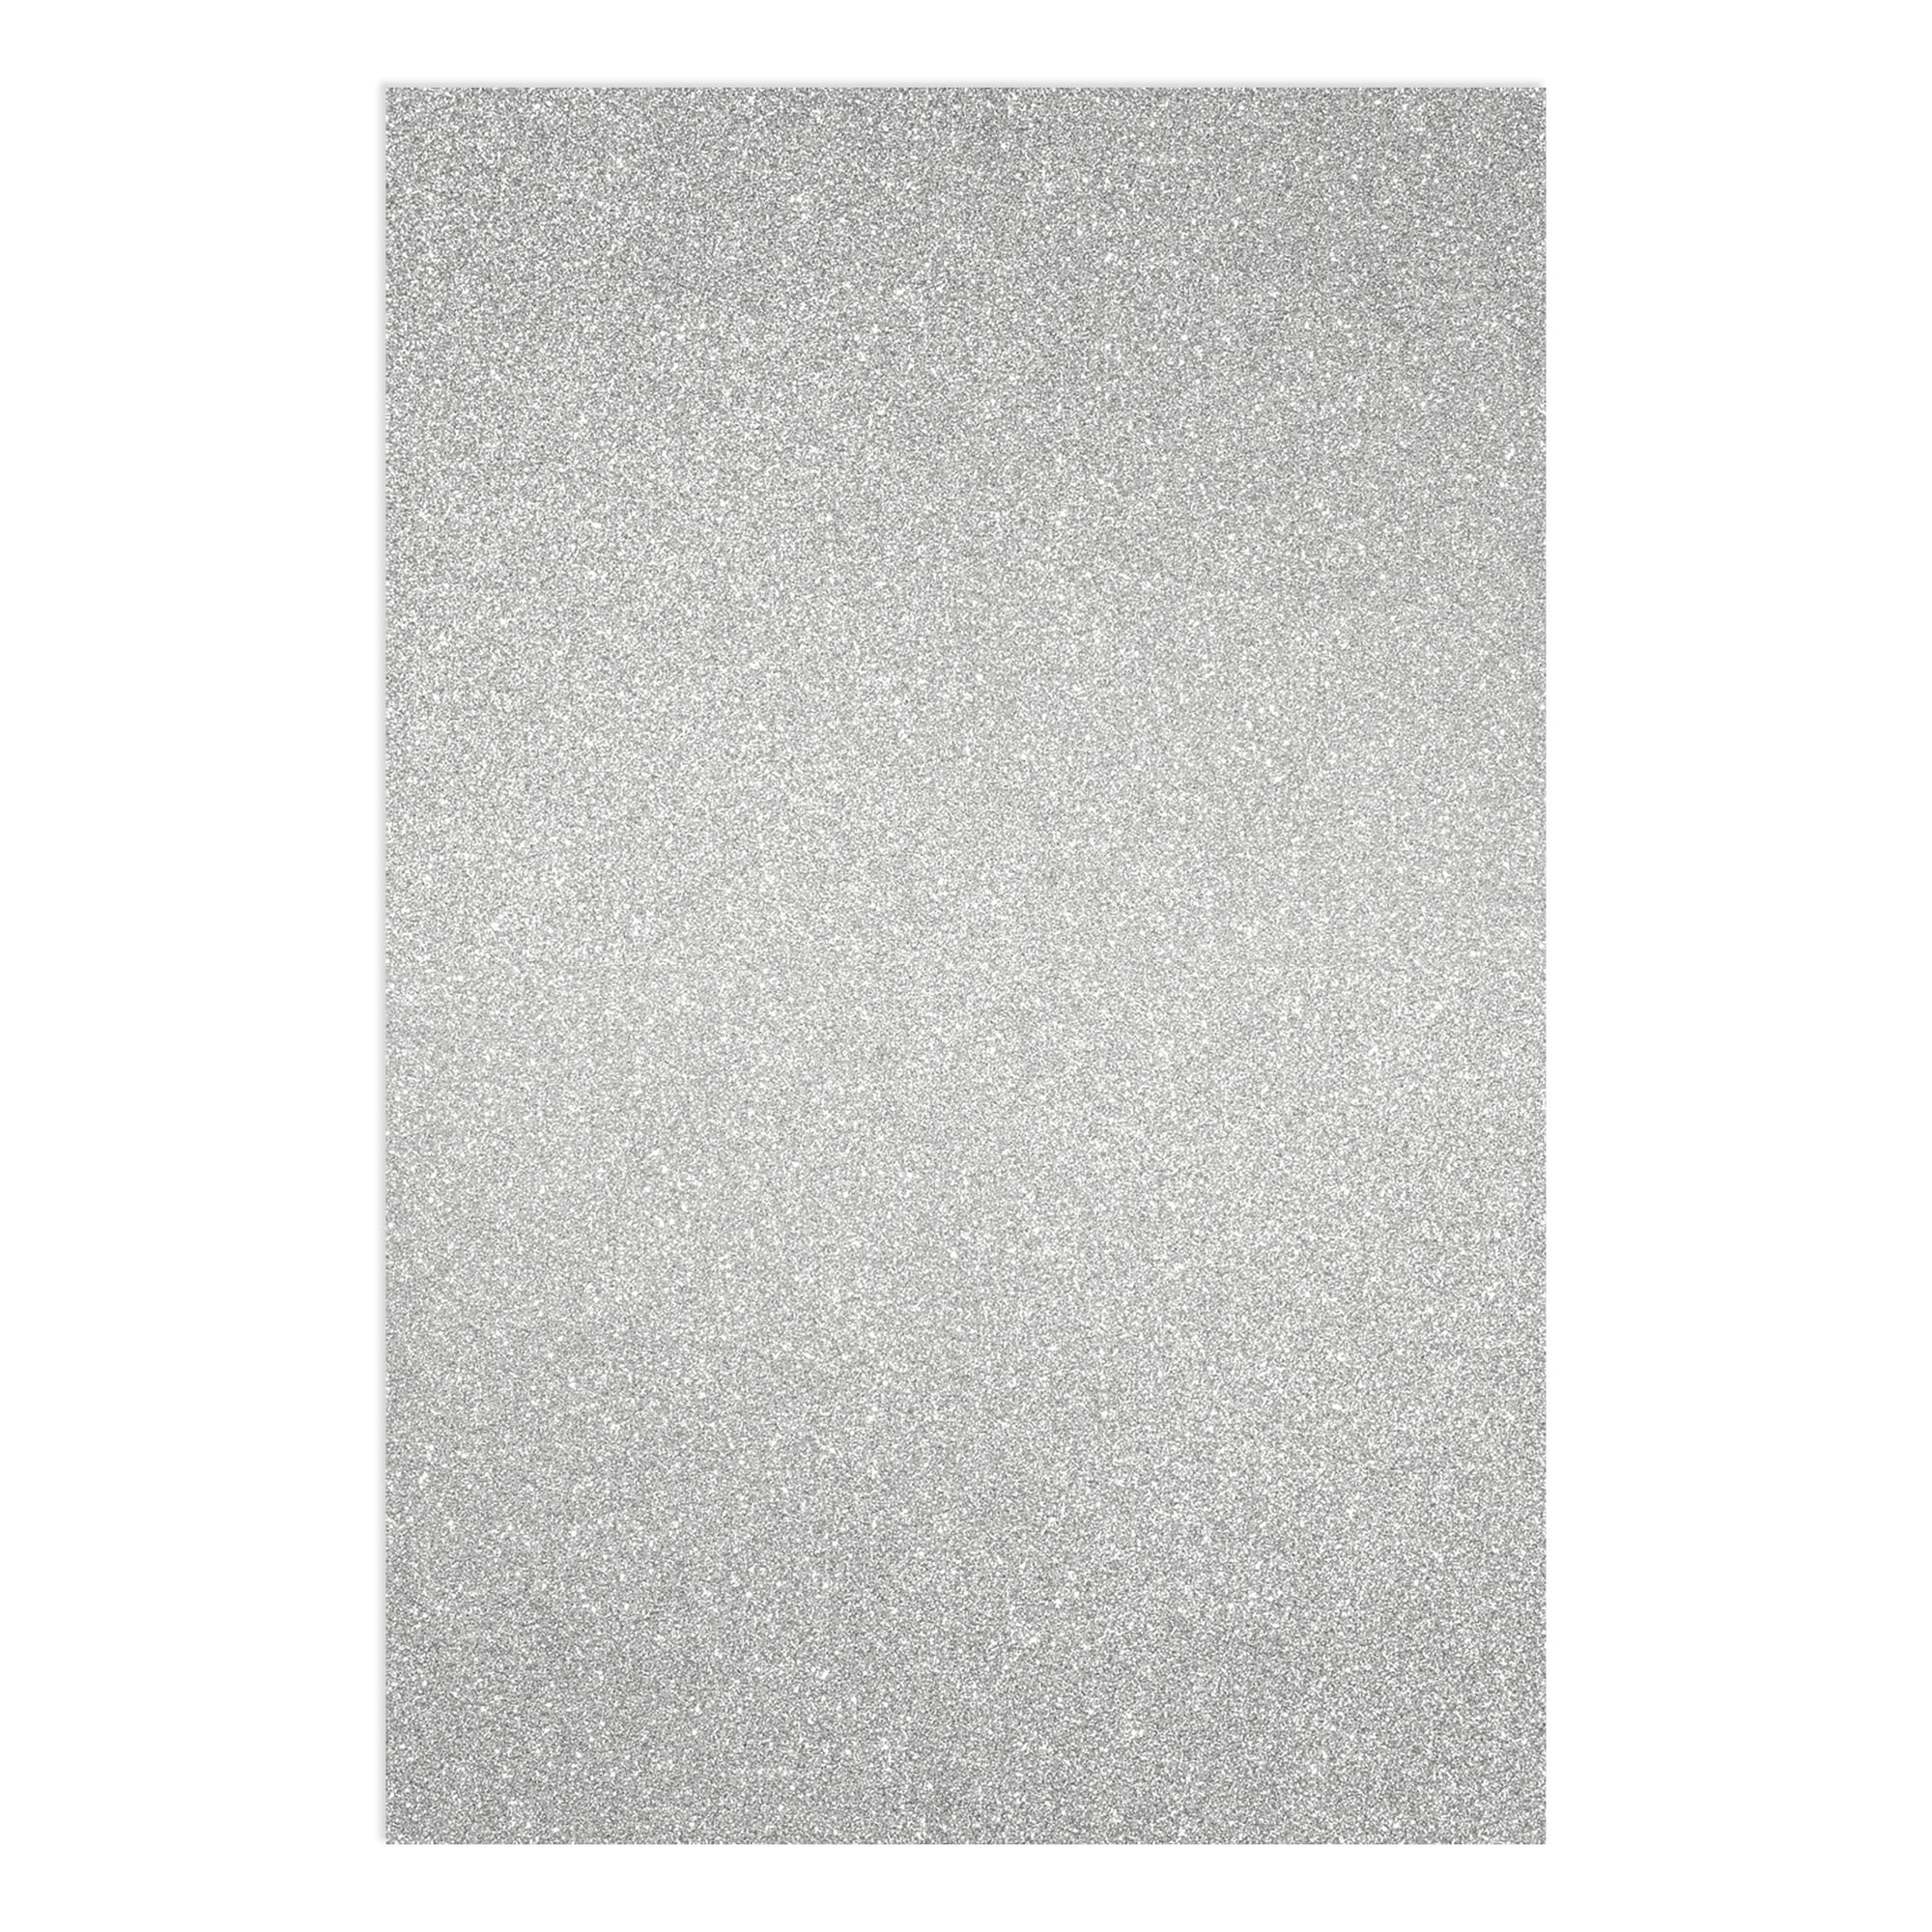 12 Pack Silver Glitter Stocking Shapes, Holiday Glitter Cardstock